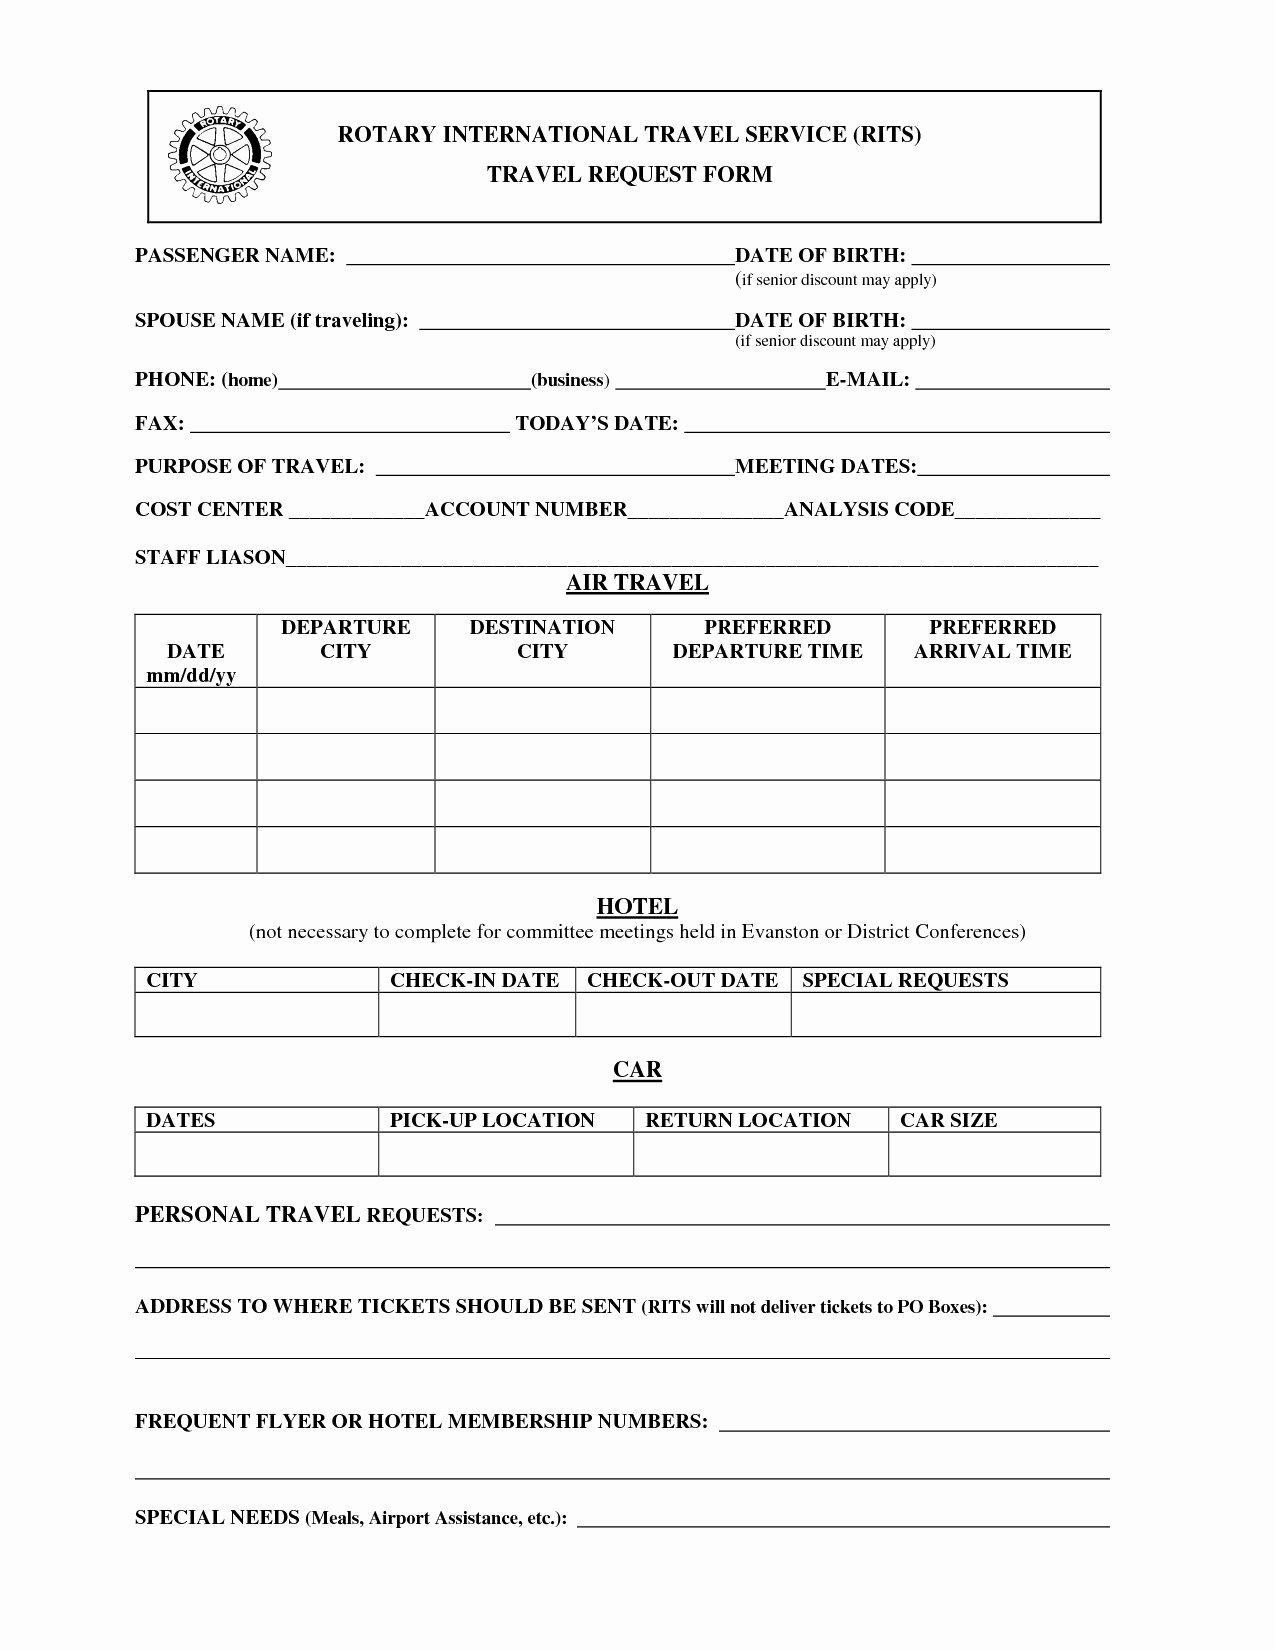 Business Travel Request form Inspirational 20 Business Travel Request form – Guiaubuntupt